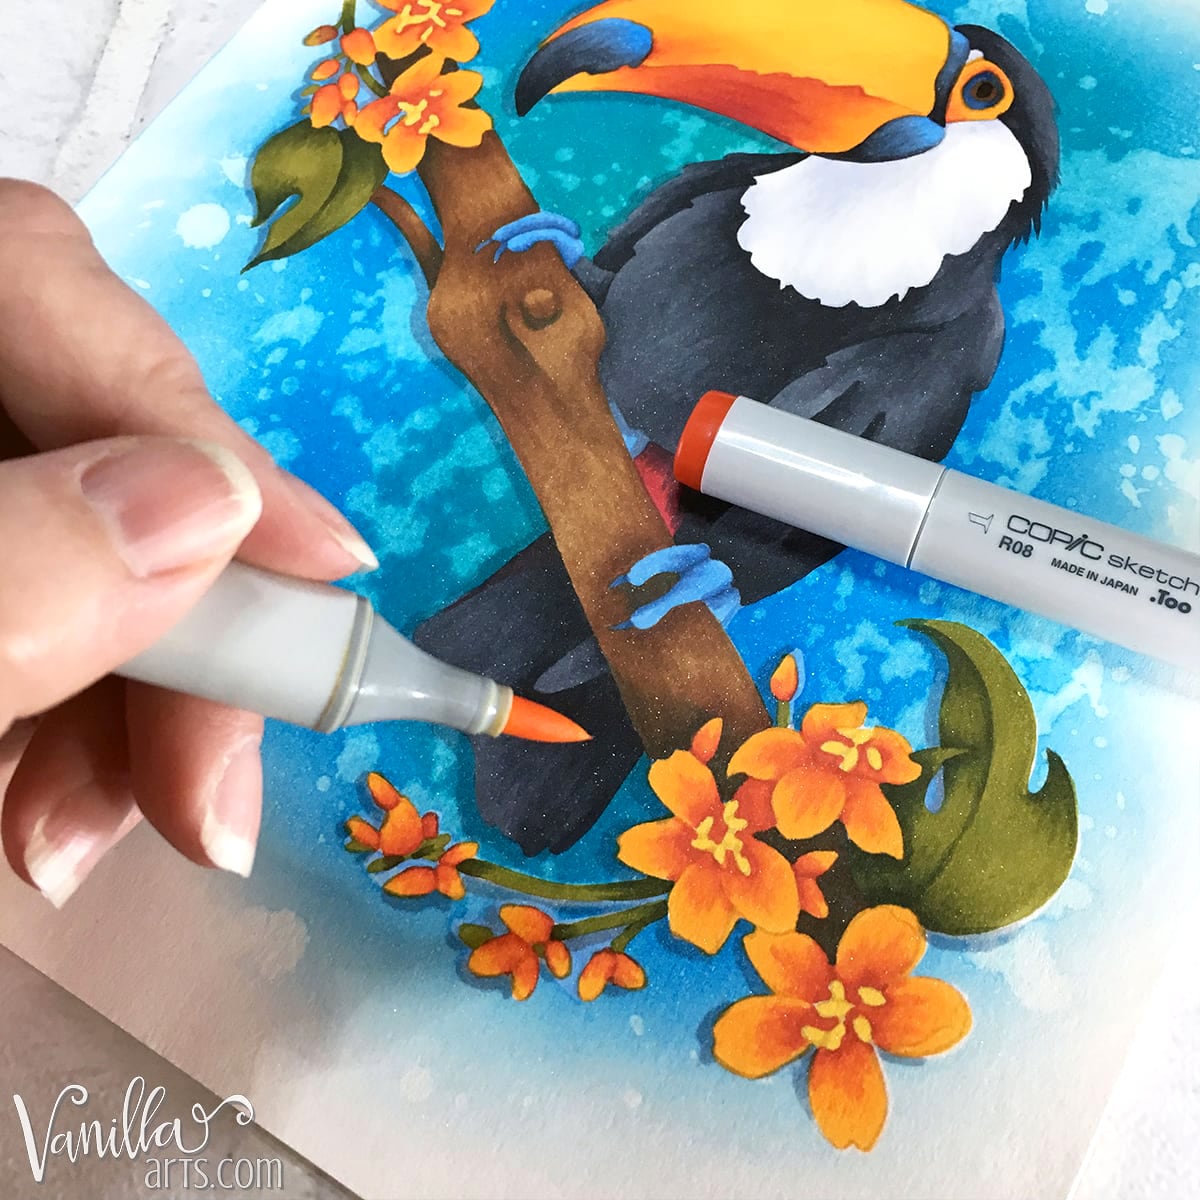 Art Realistic Copic Markers 1 698 copic art markers products are ...